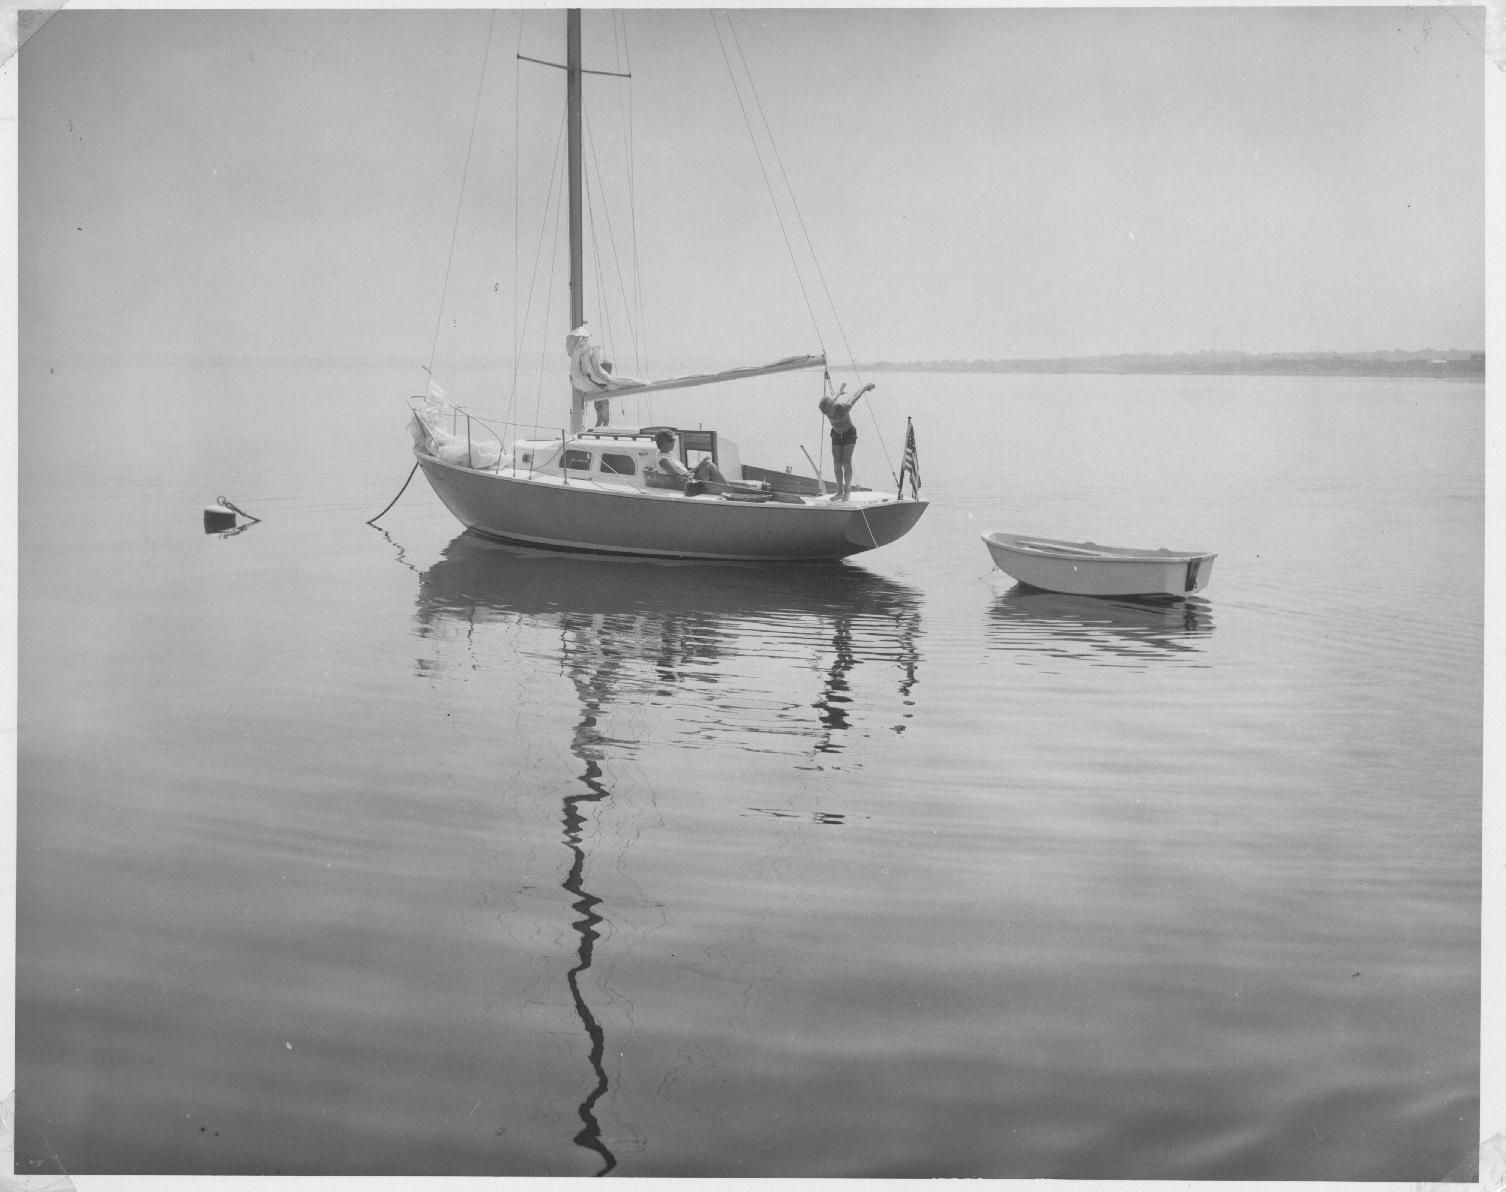 Sailboat on tranquil waters, circa 1968